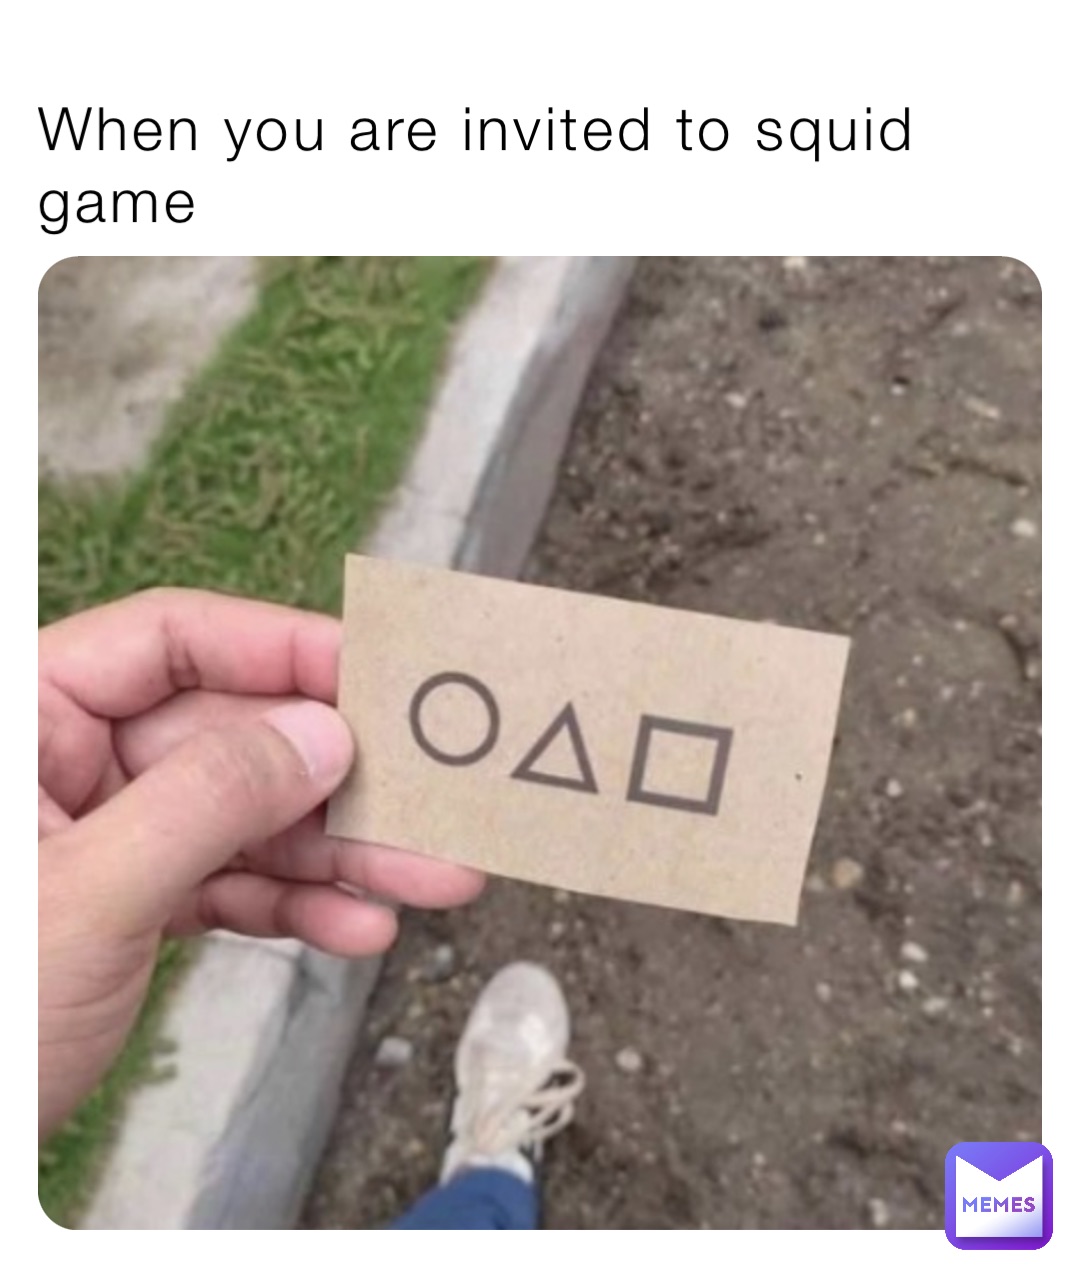 When you are invited to squid game